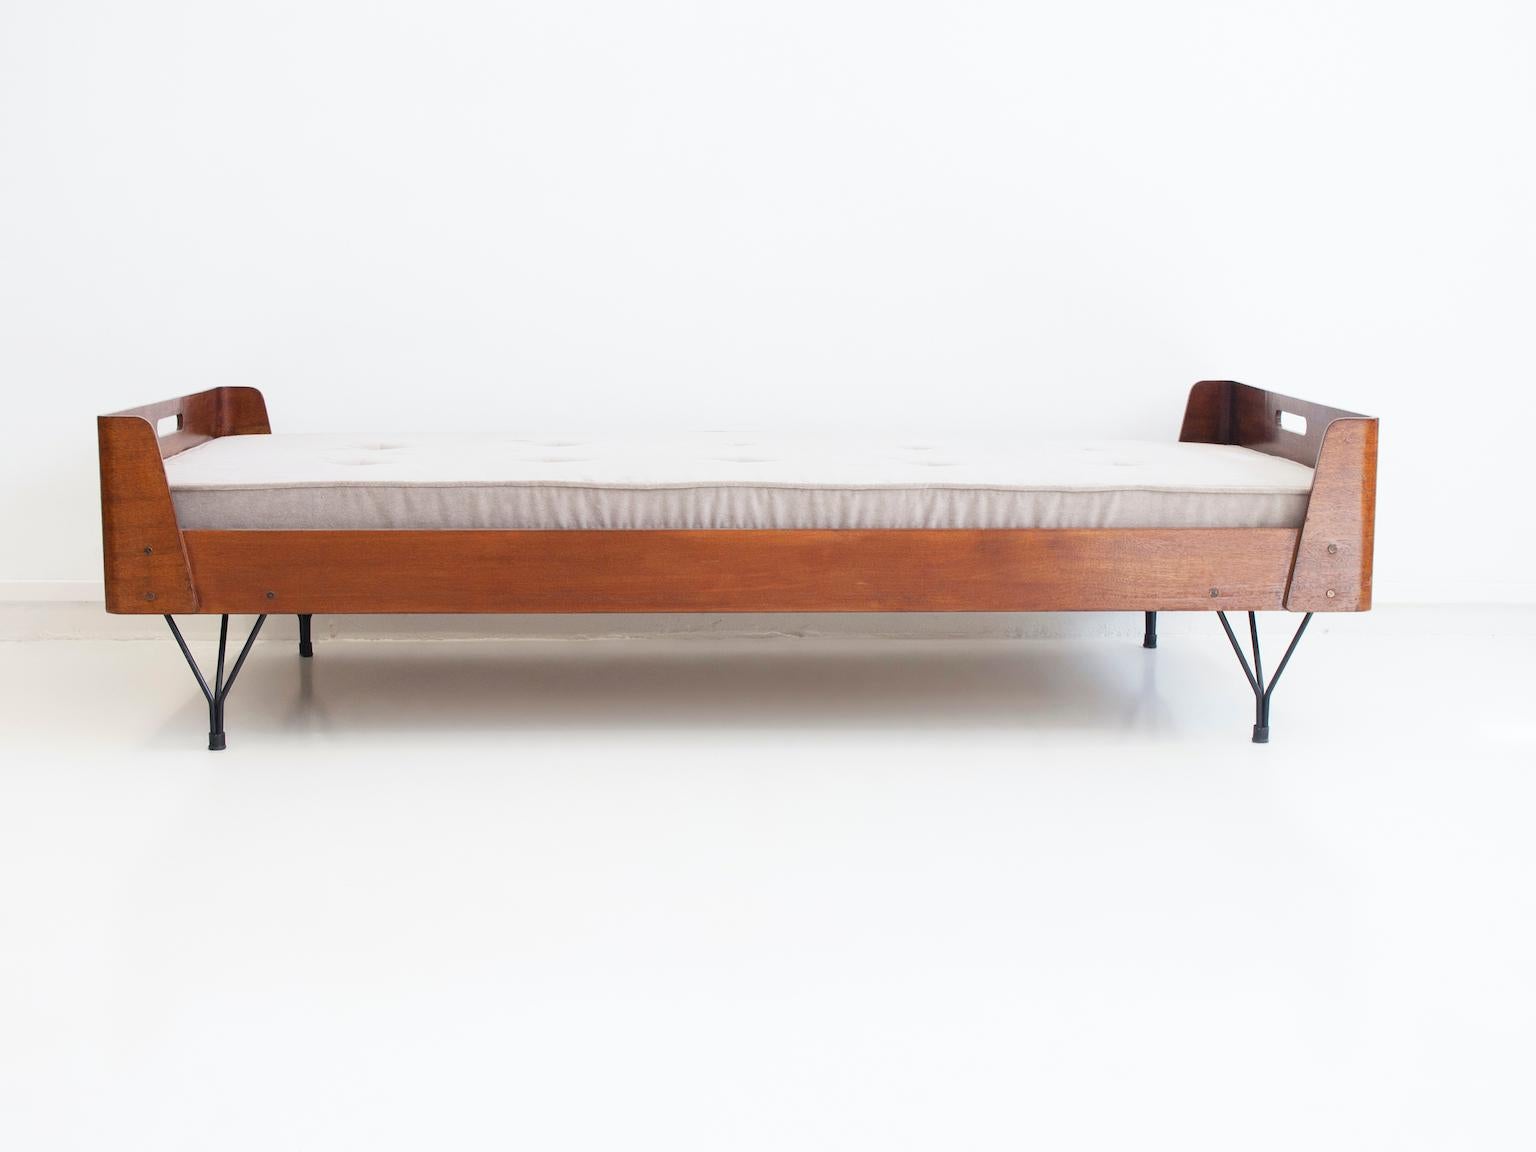 Daybed produced by Rima, Italy, circa 1950s. Supports are made of lacquered iron rods, curved plywood structure, brass details. Recently reupholstered with off-white velvet fabric.